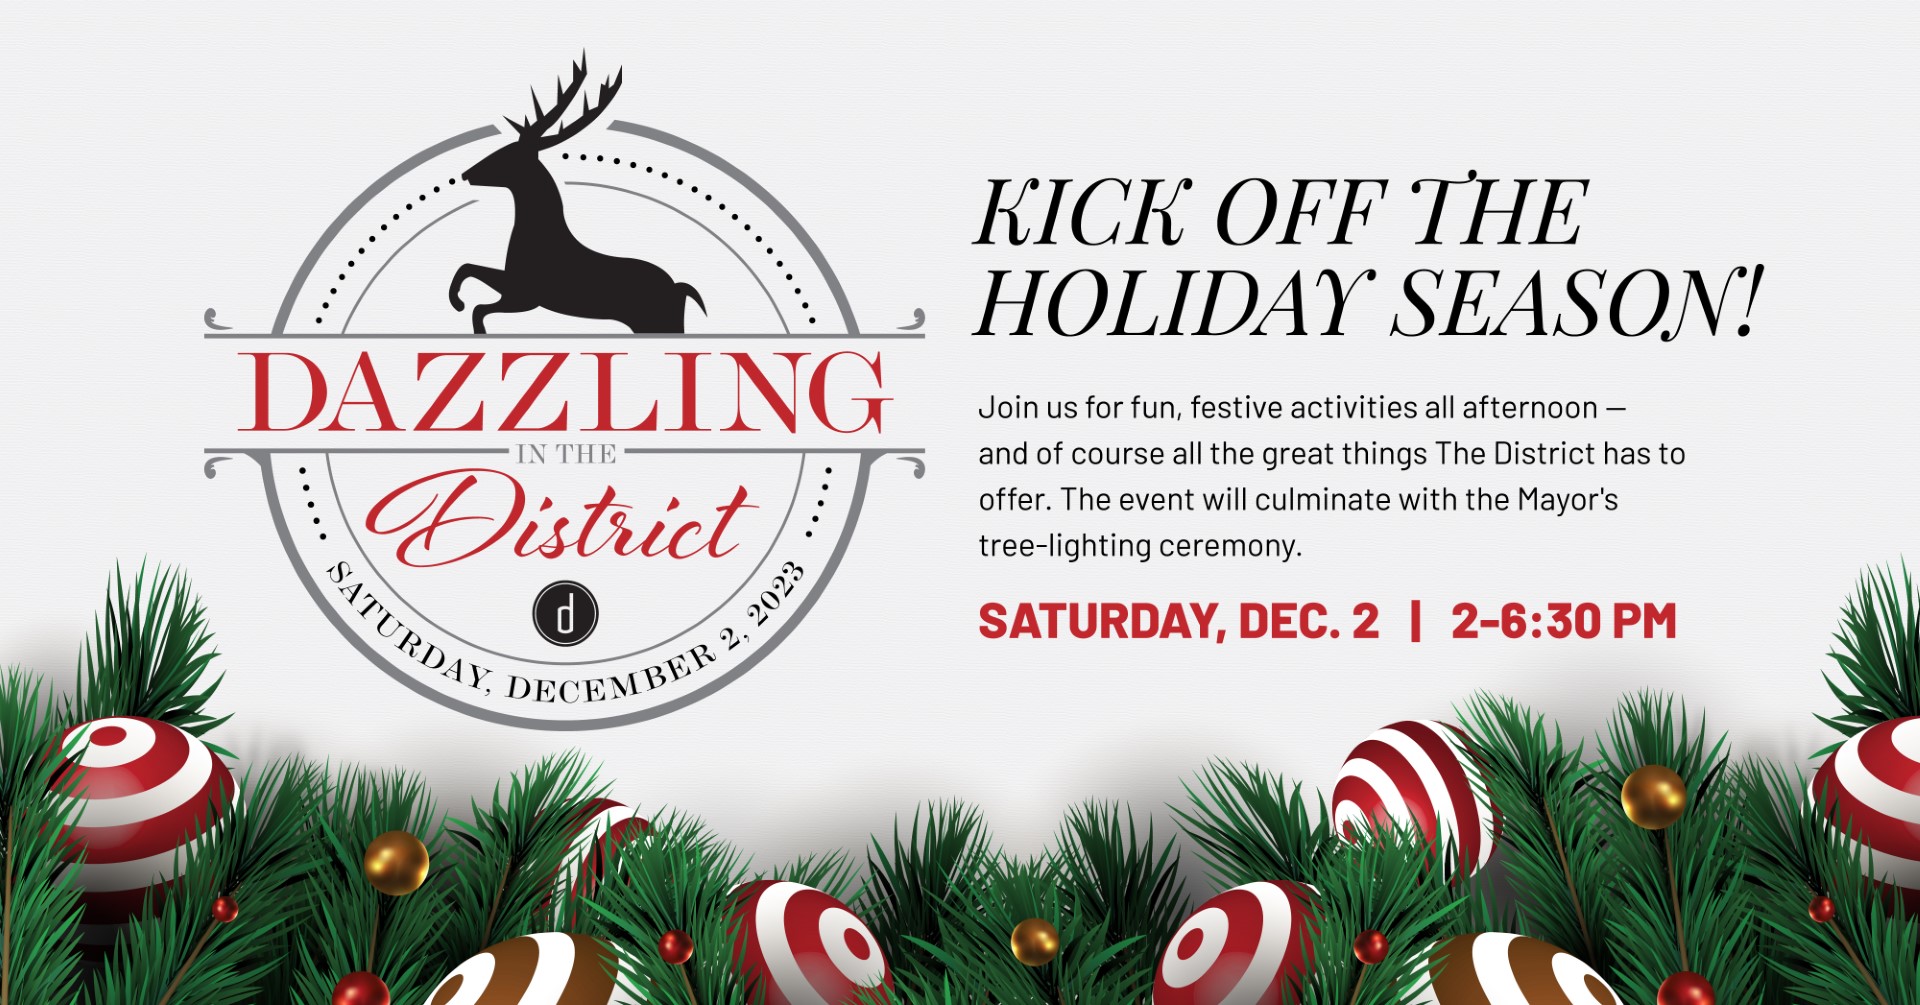 Dazzling in the District Kick off the Holiday Season December 2nd